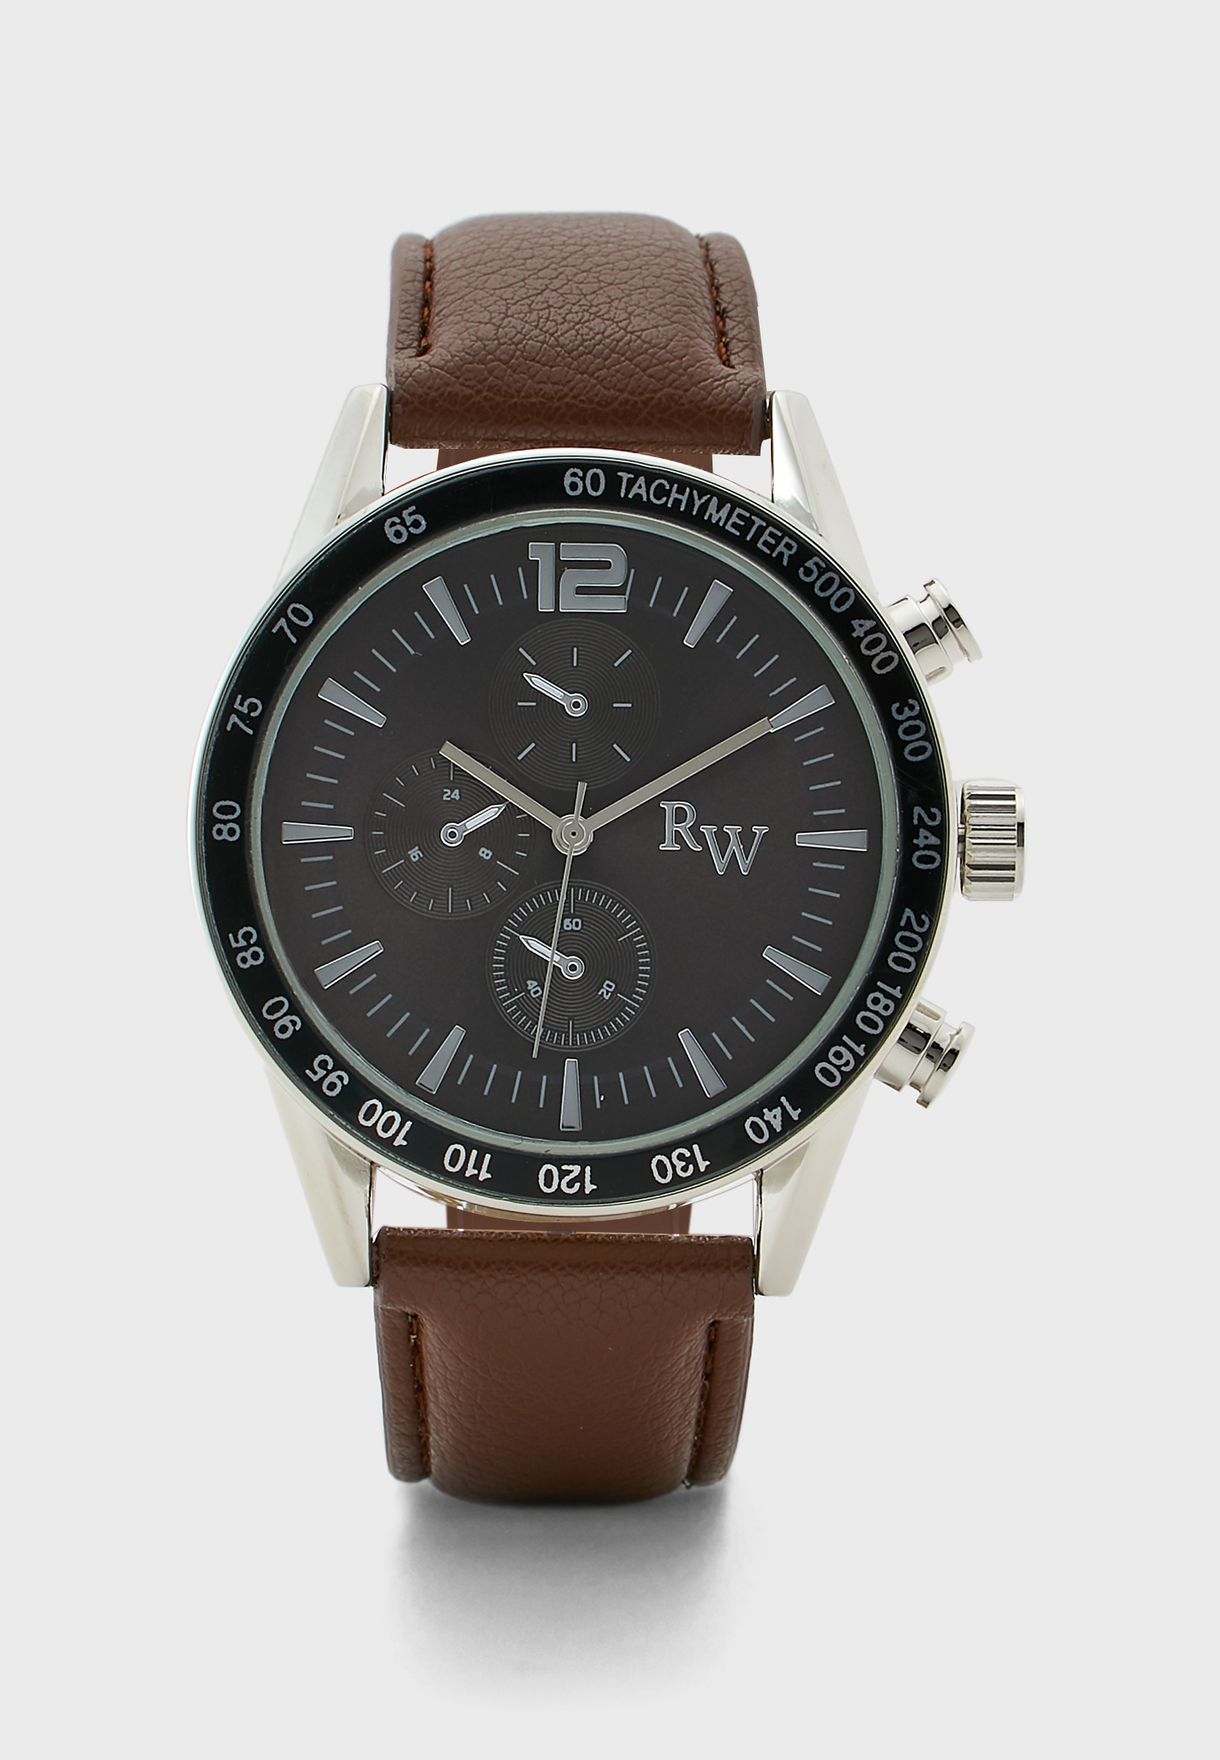 Analogue Watch With Sports Detail